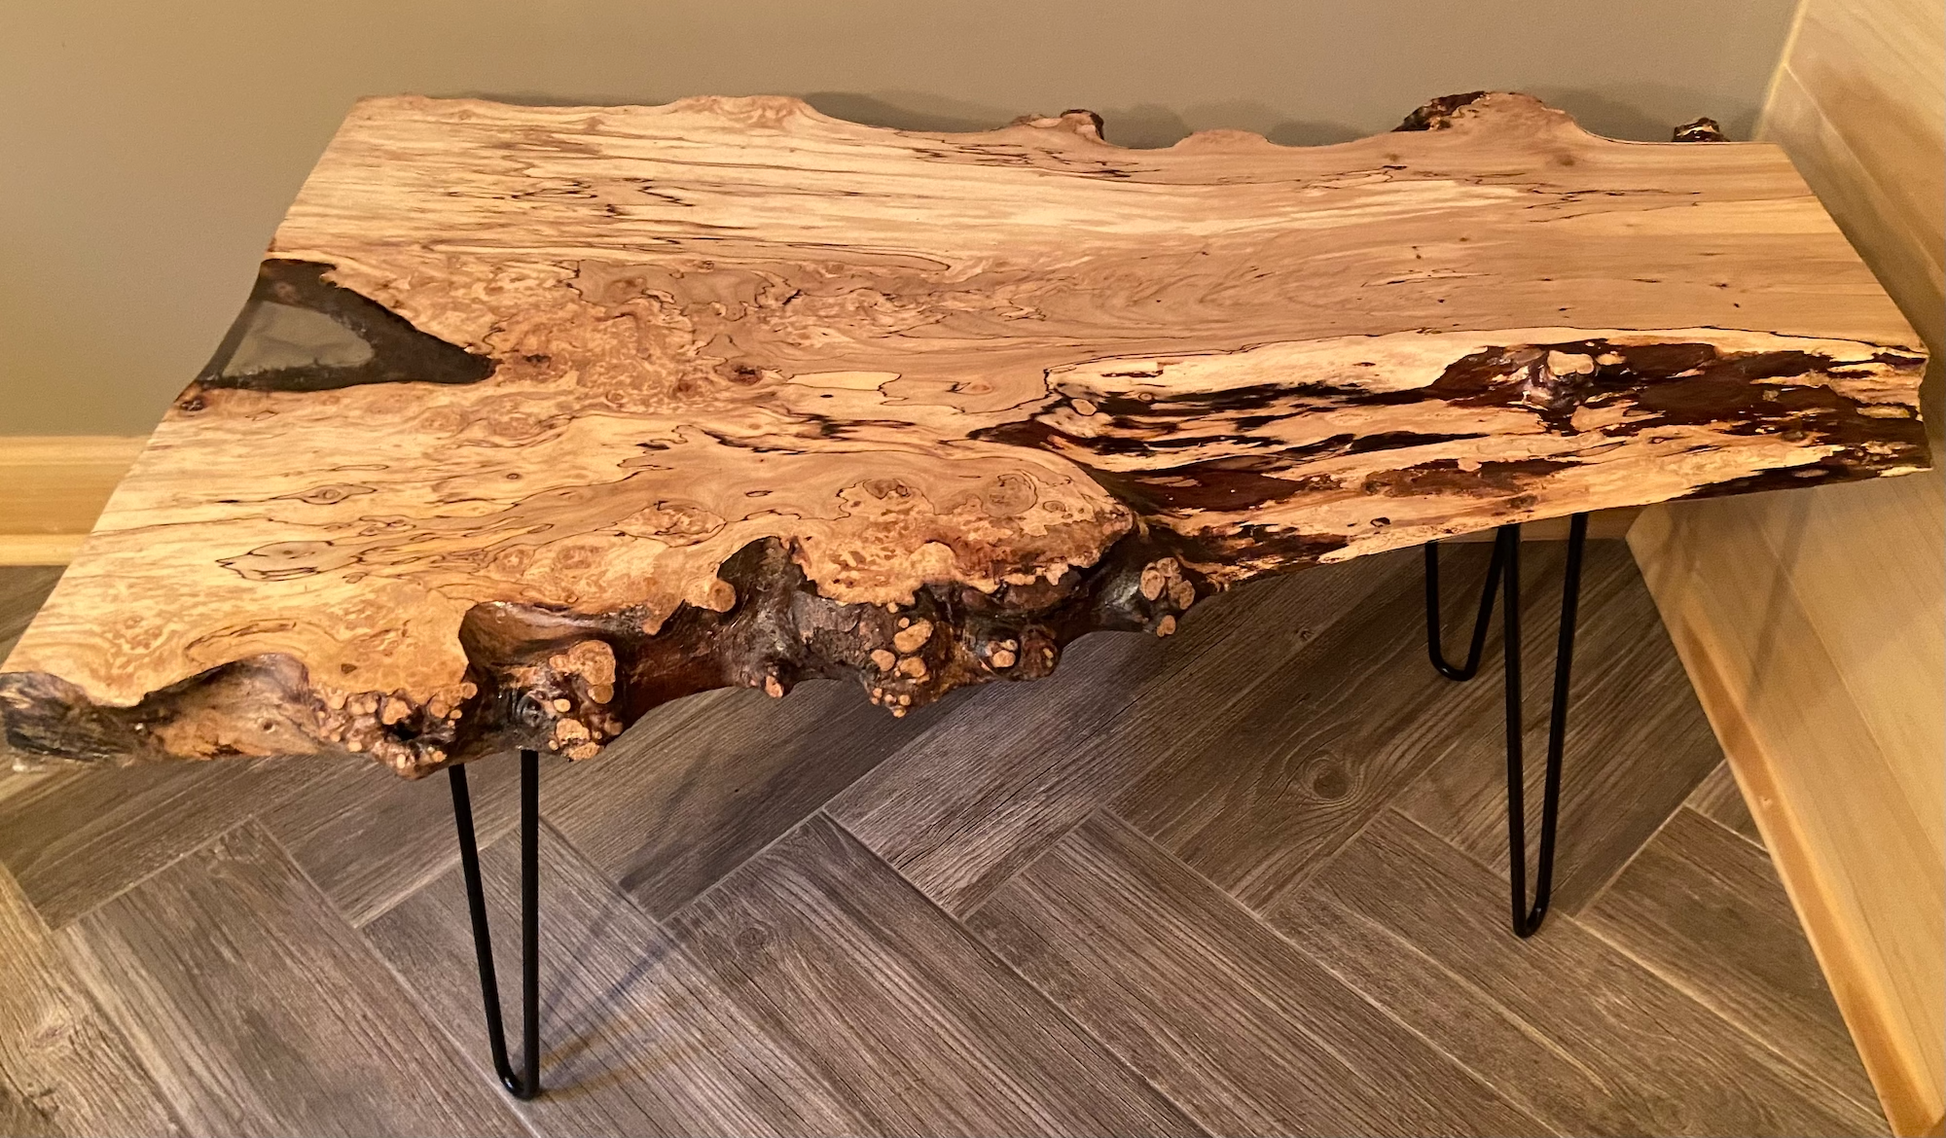 rustic rugged spalted maple live edge coffee table unique spalted maple coffee table spalted maple slab with burls